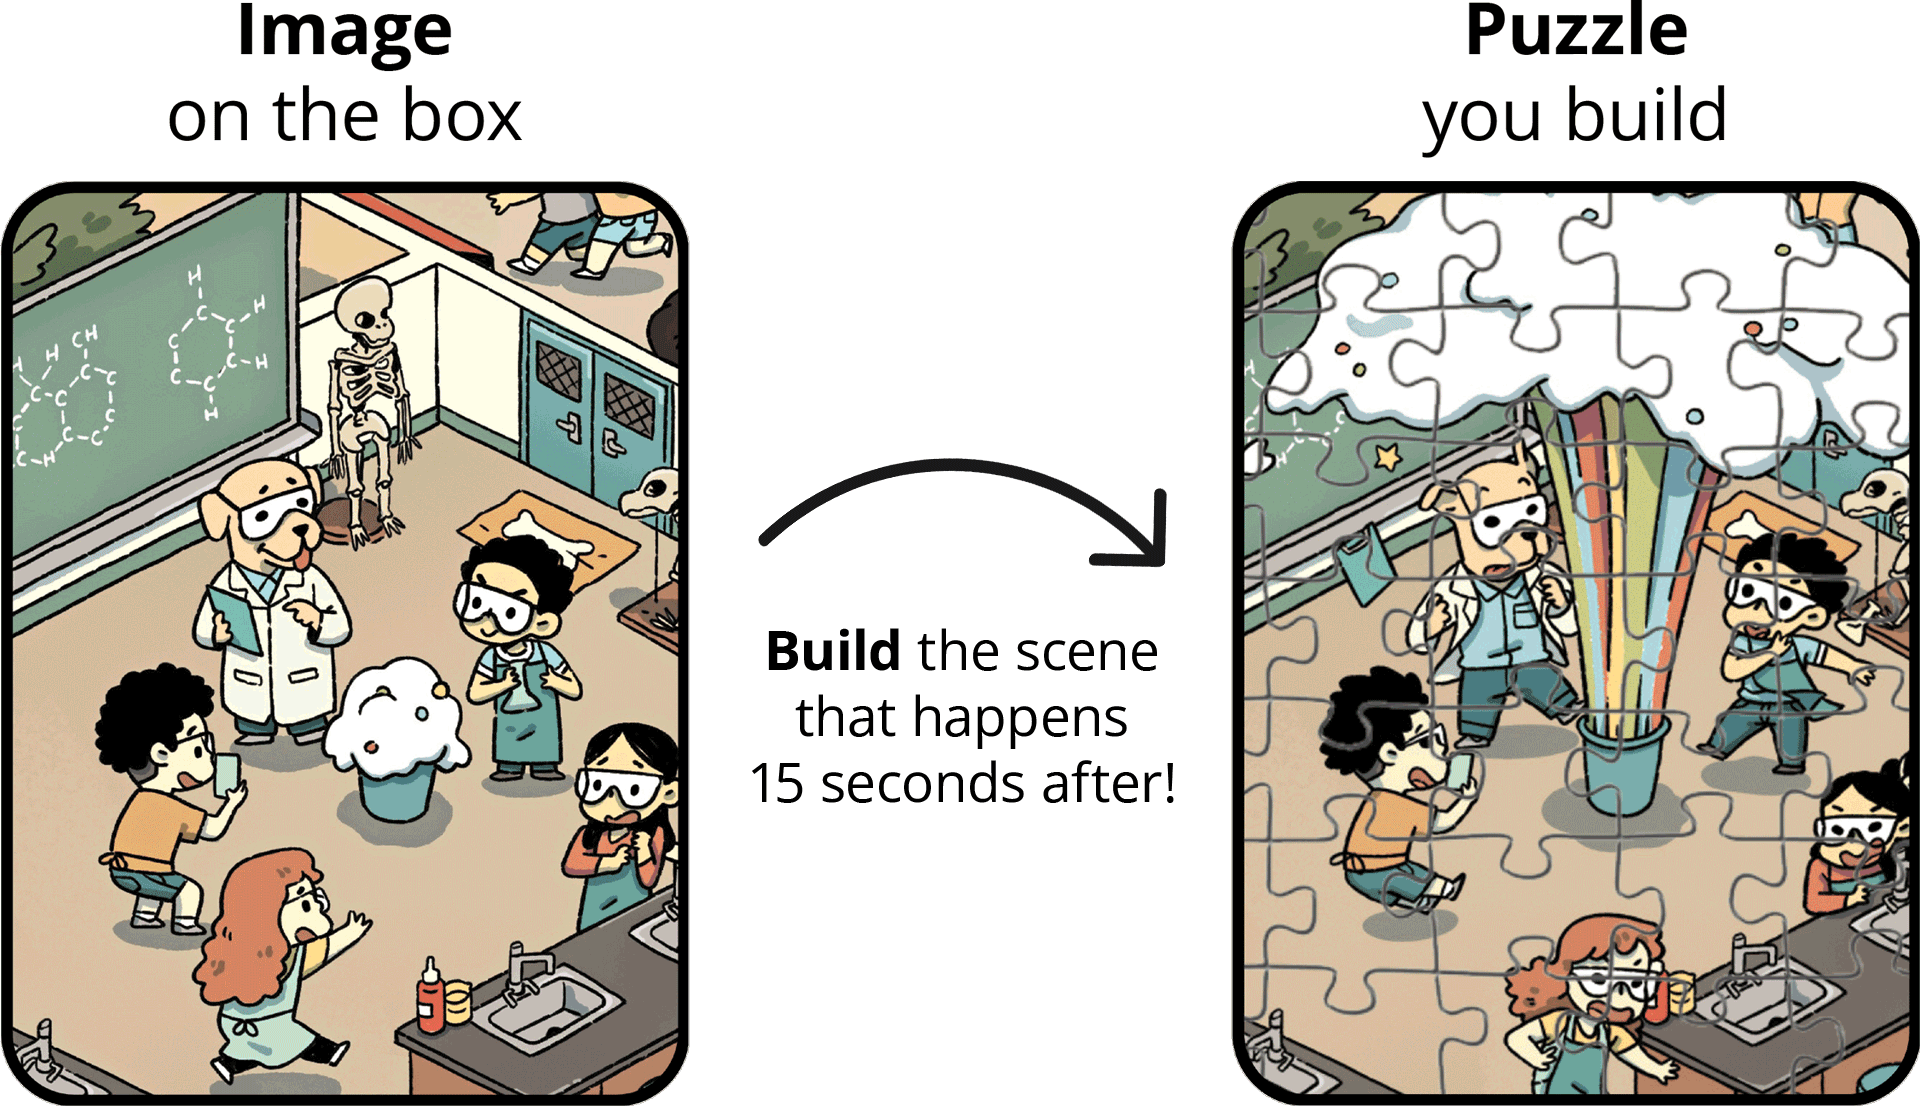 Illustration comparing a science class scene on a box to the resulting scene in a built puzzle.